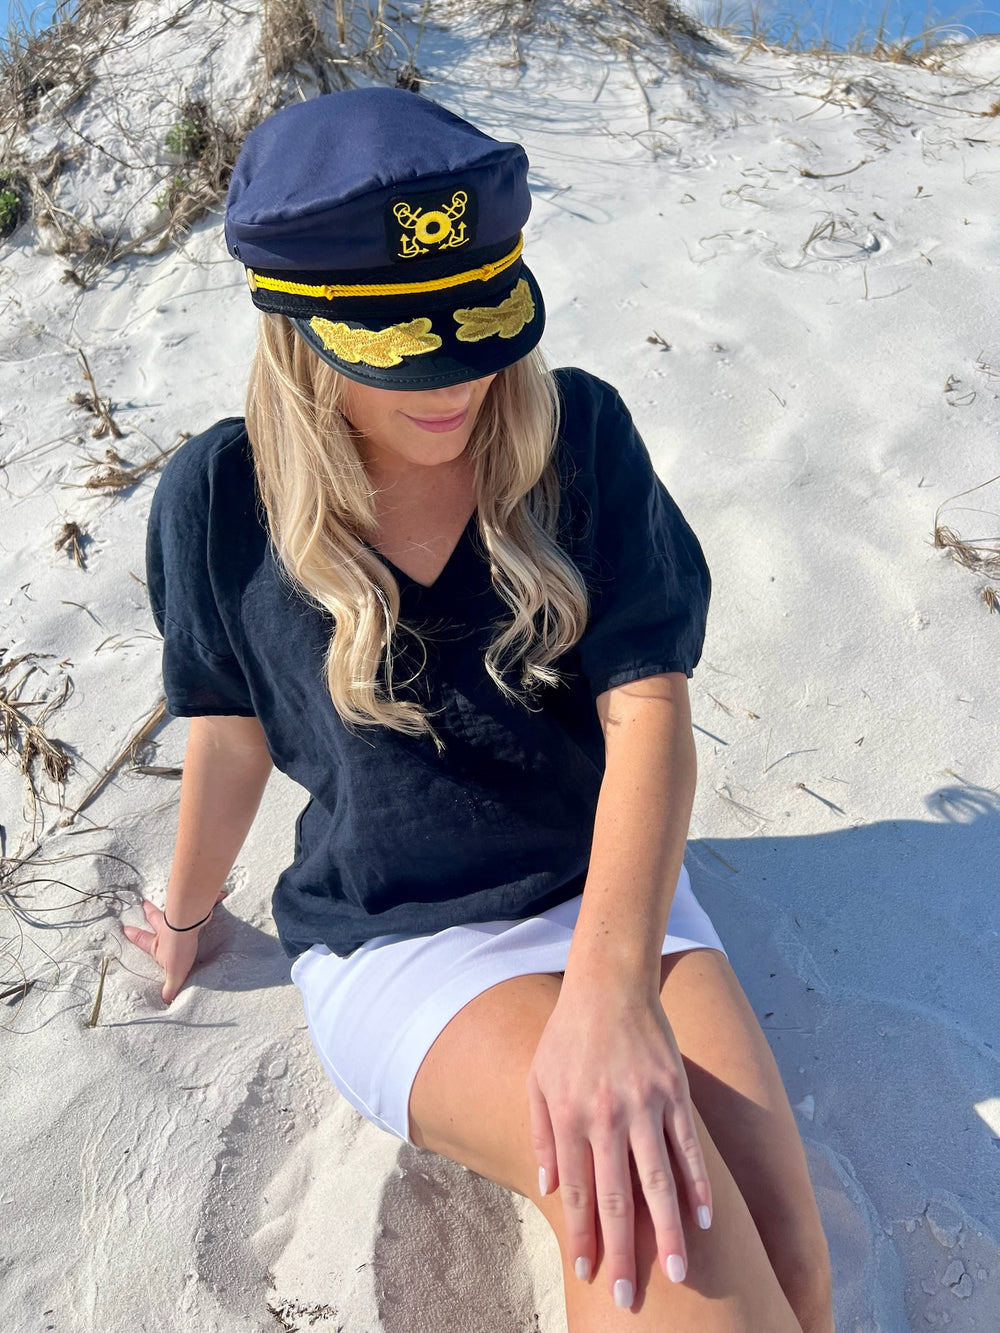 Captain hat on woman in the sand